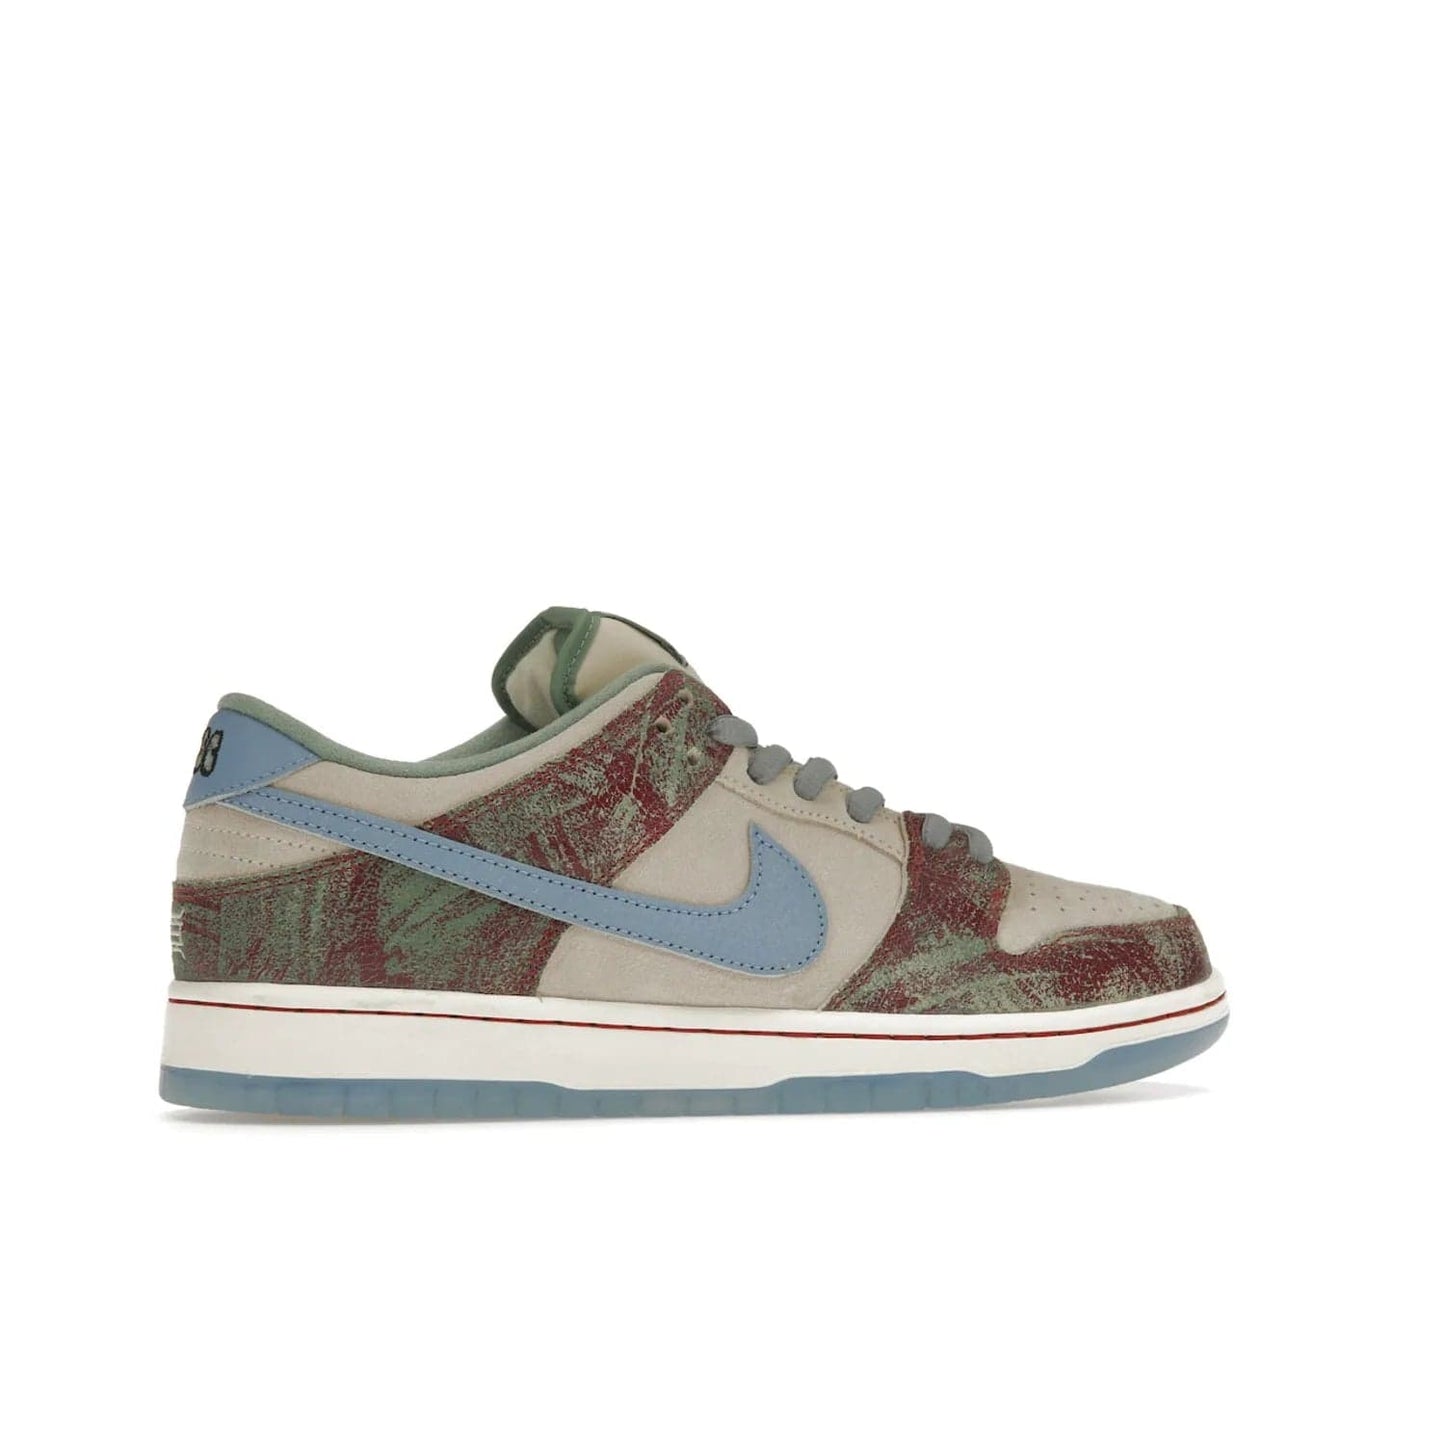 Nike SB Dunk Low Crenshaw Skate Club - Image 35 - Only at www.BallersClubKickz.com - Introducing the Nike SB Dunk Low Crenshaw Skate Club! Classic skate shoes with Sail and Light Blue upper, Cedar accents, padded collars and superior grip for comfortable, stable performance and style. Ideal for any skate session.